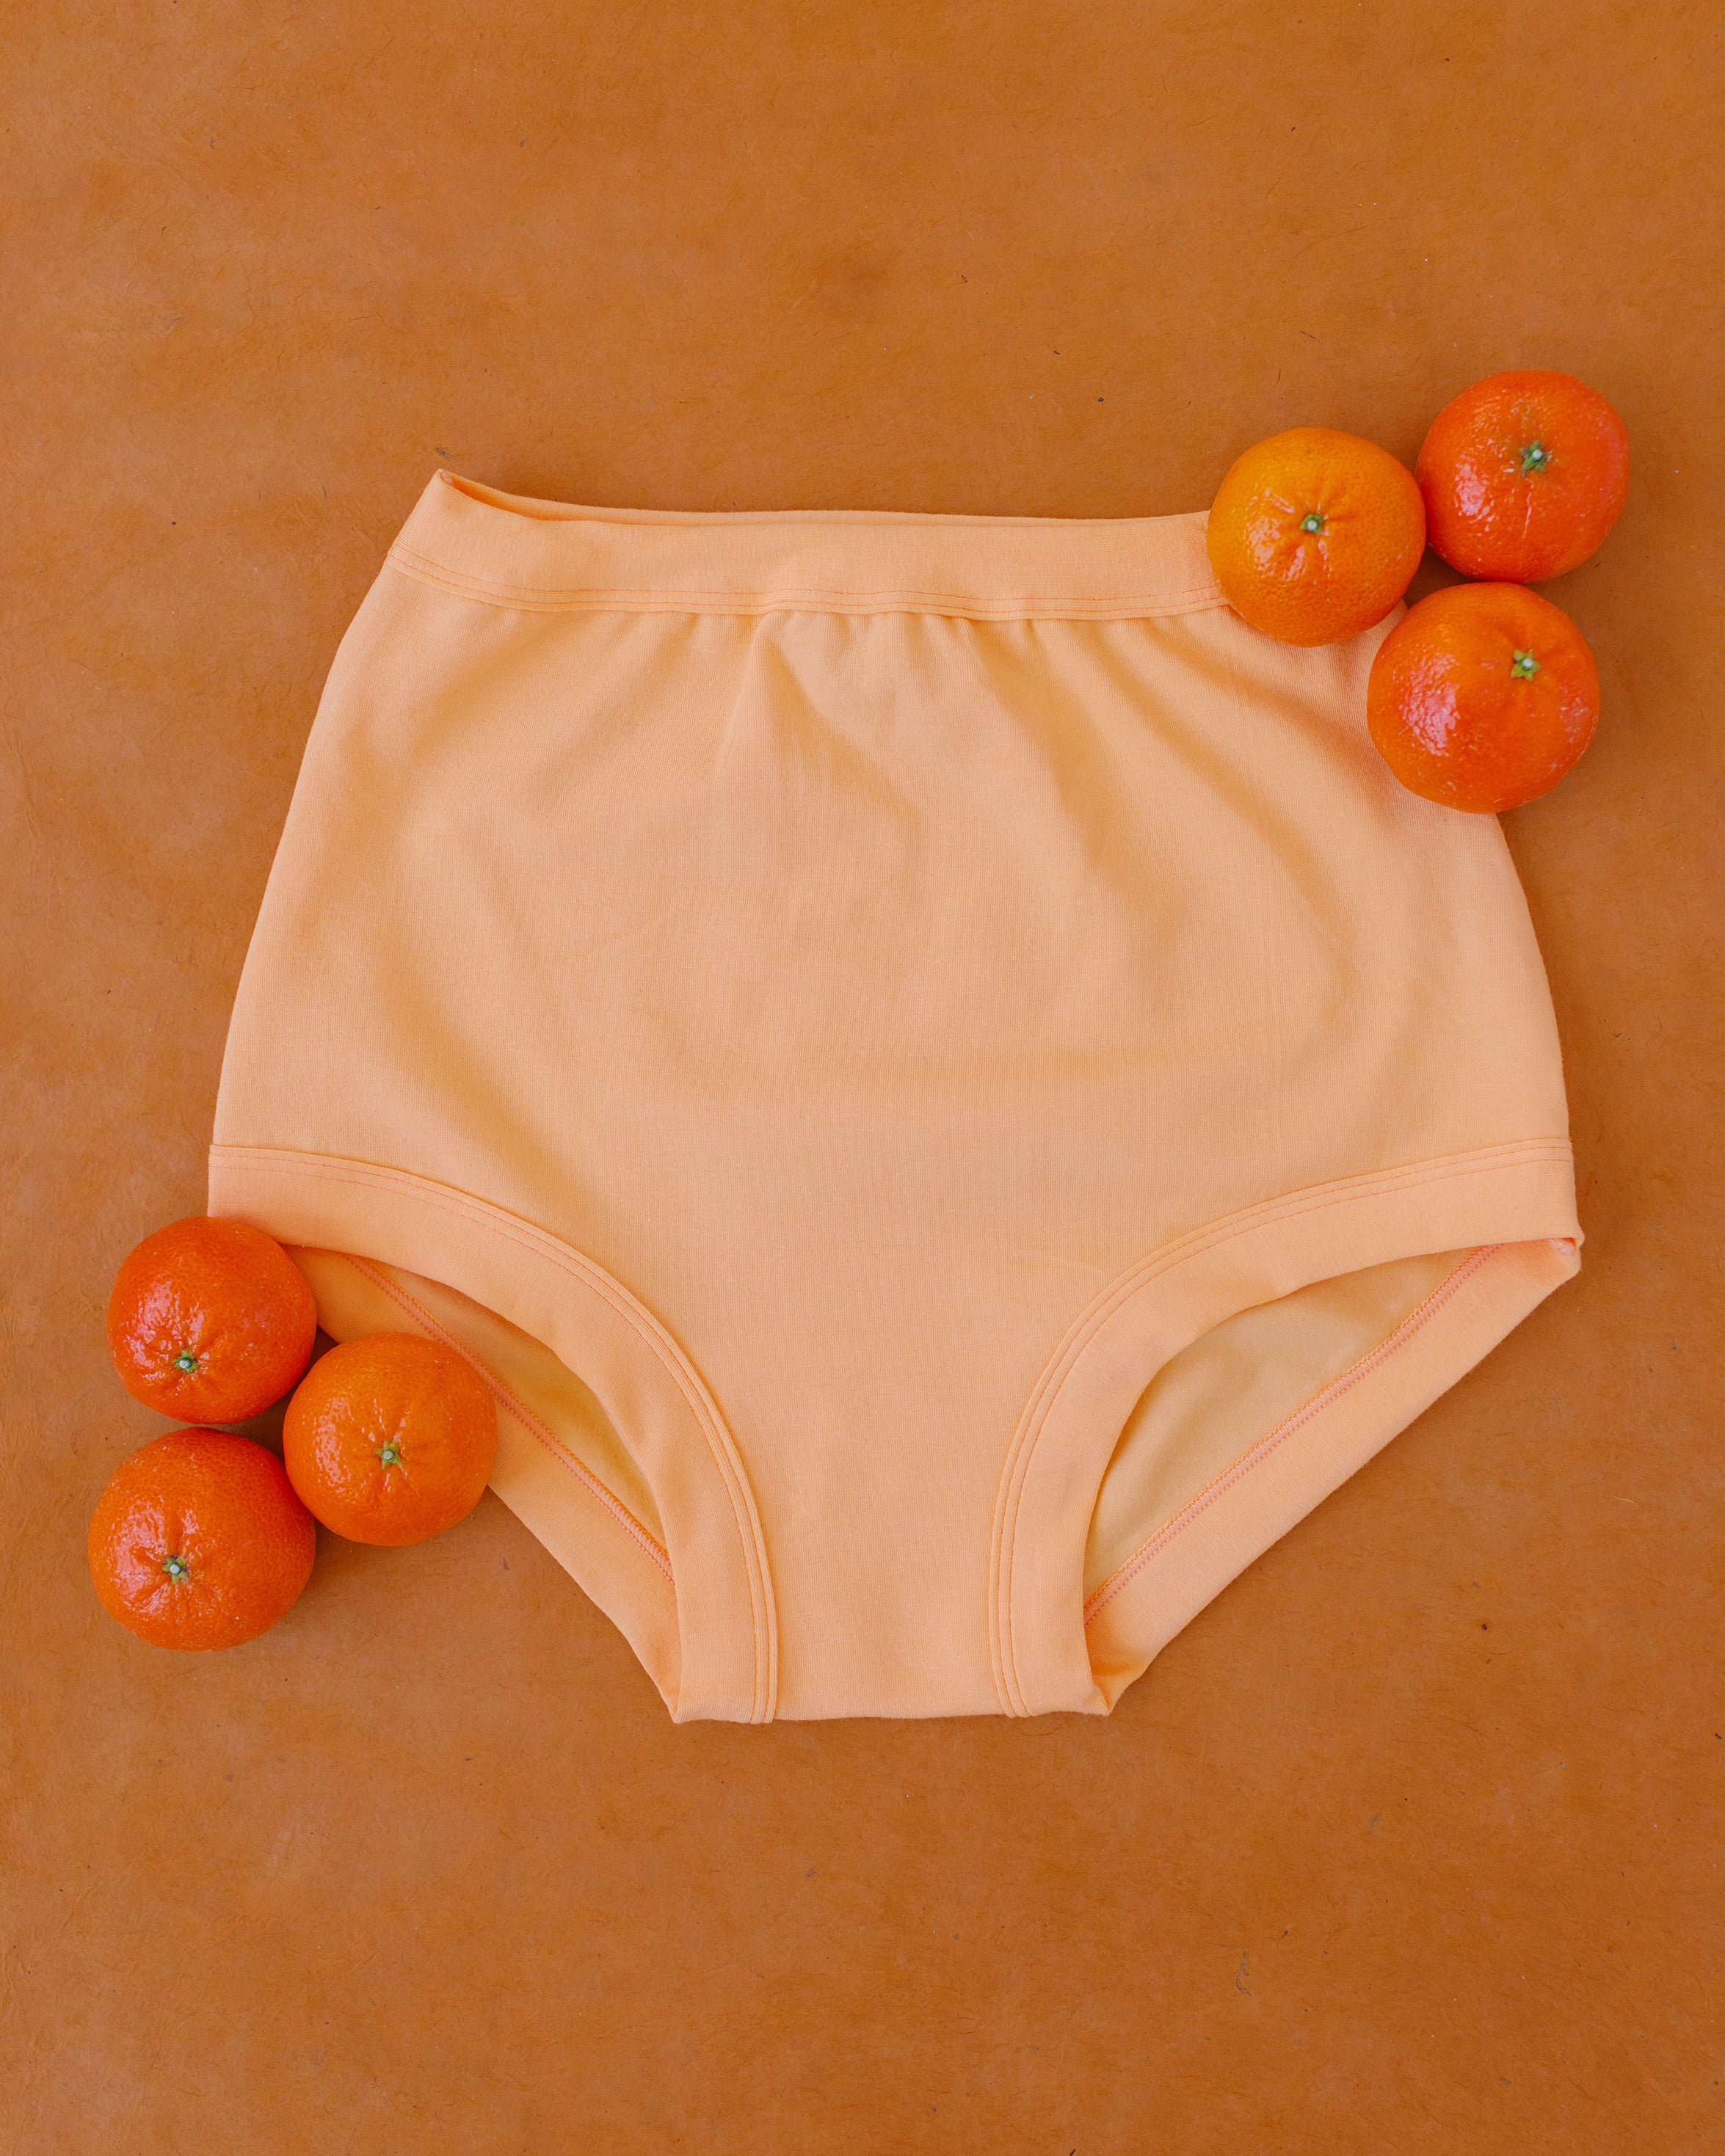 Flat lay of Orange Sherbet Sky Rise style underwear on a purple surface with oranges around it.